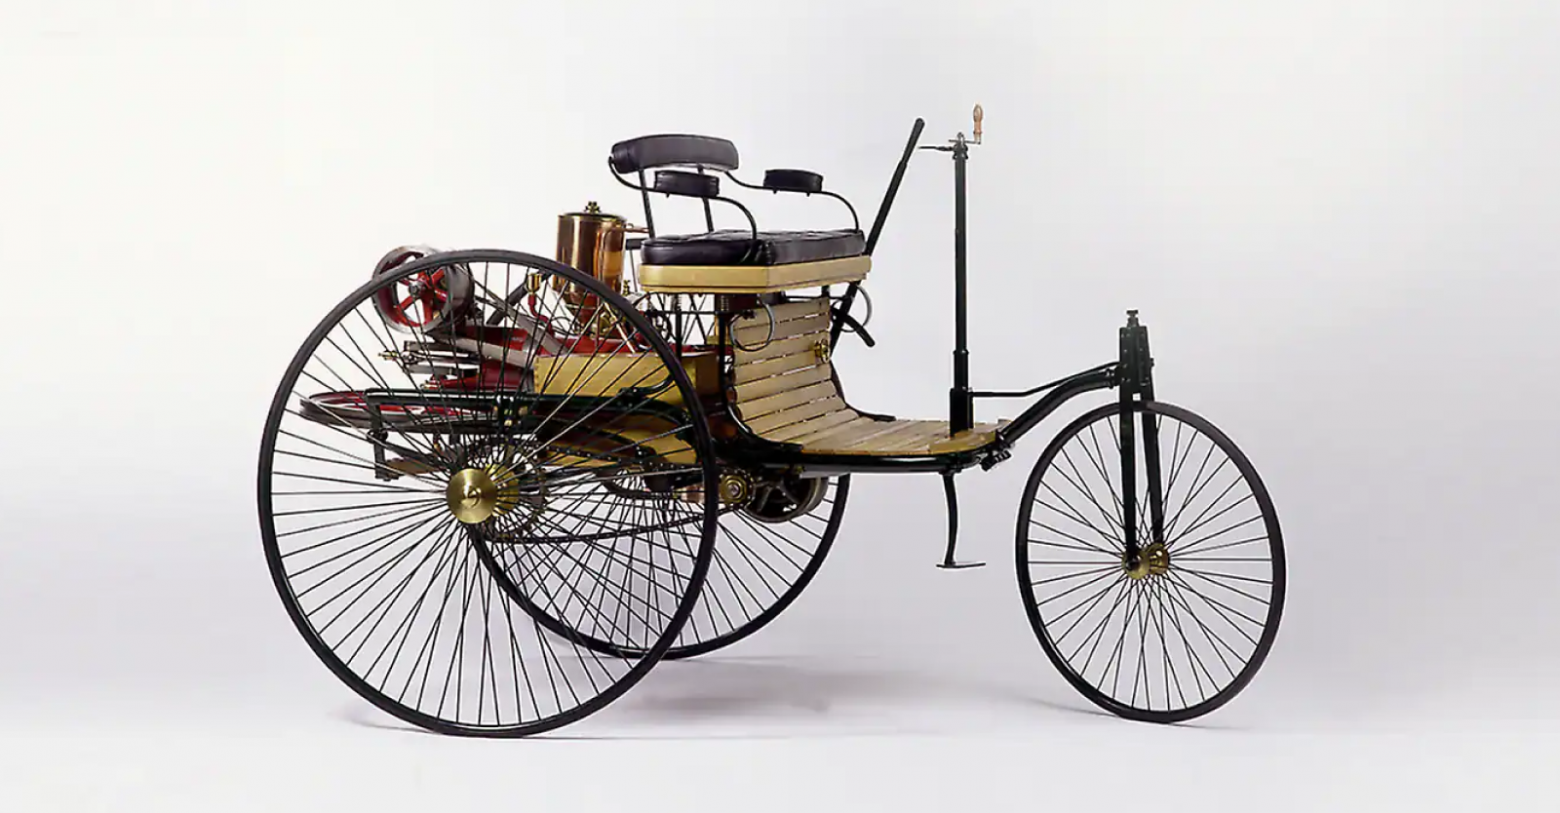 The first stationary gasoline engine developed by Carl Benz